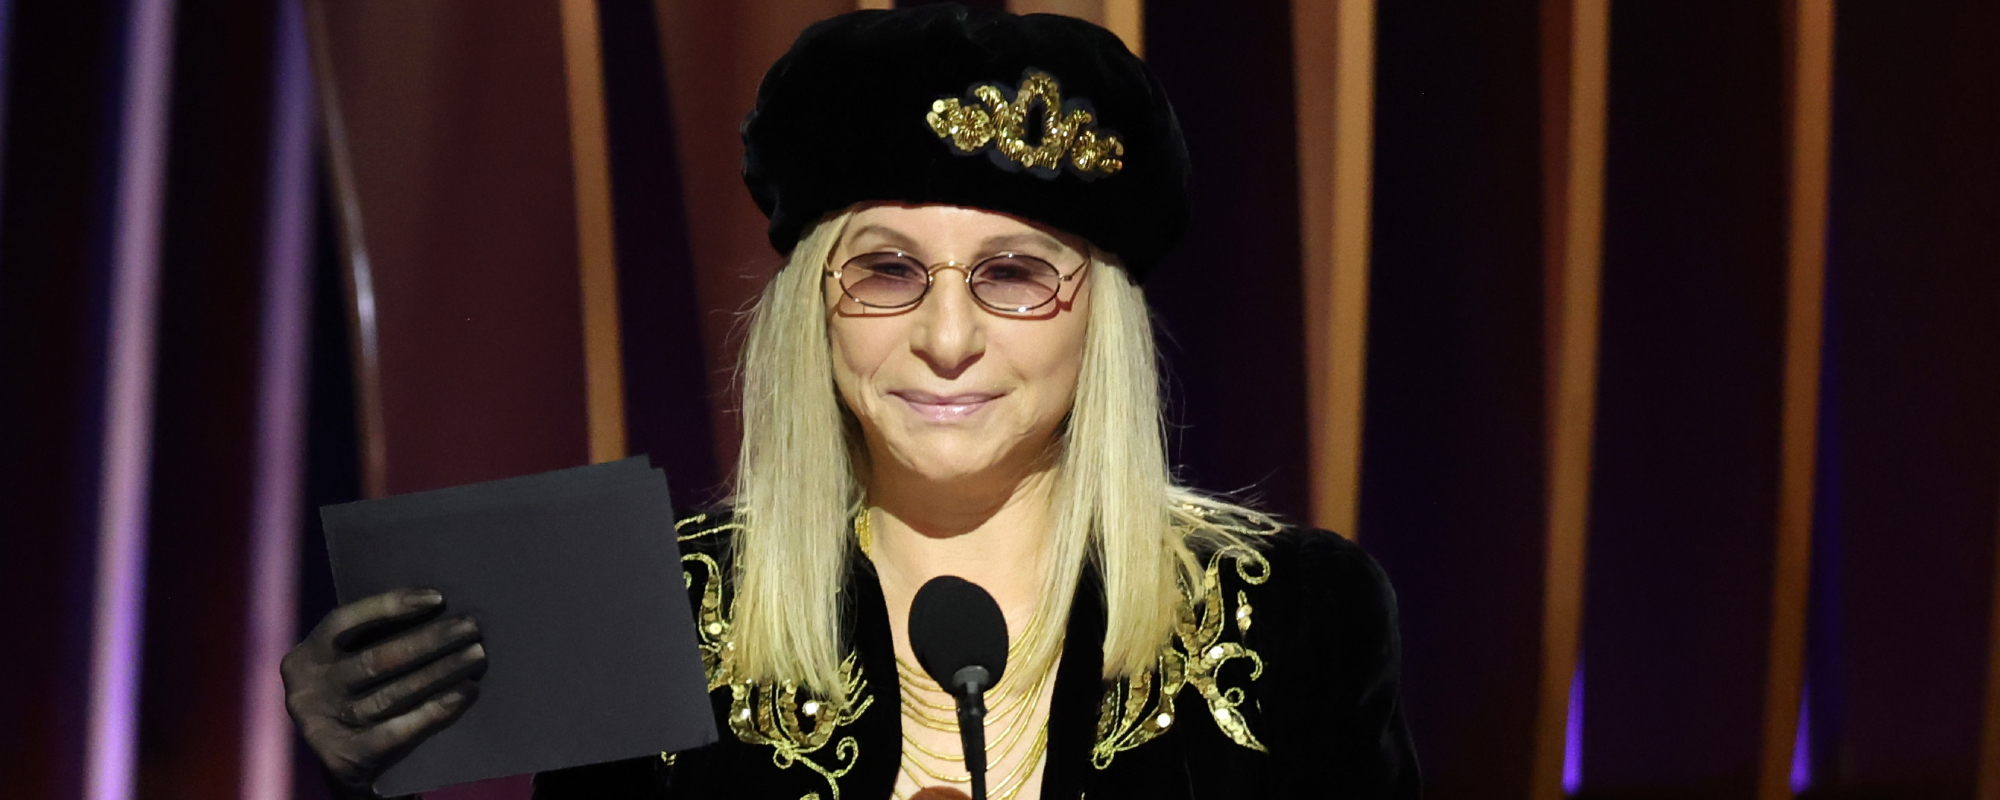 Barbra Streisand Teases New Song “Love Will Survive” After 6-Year Hiatus